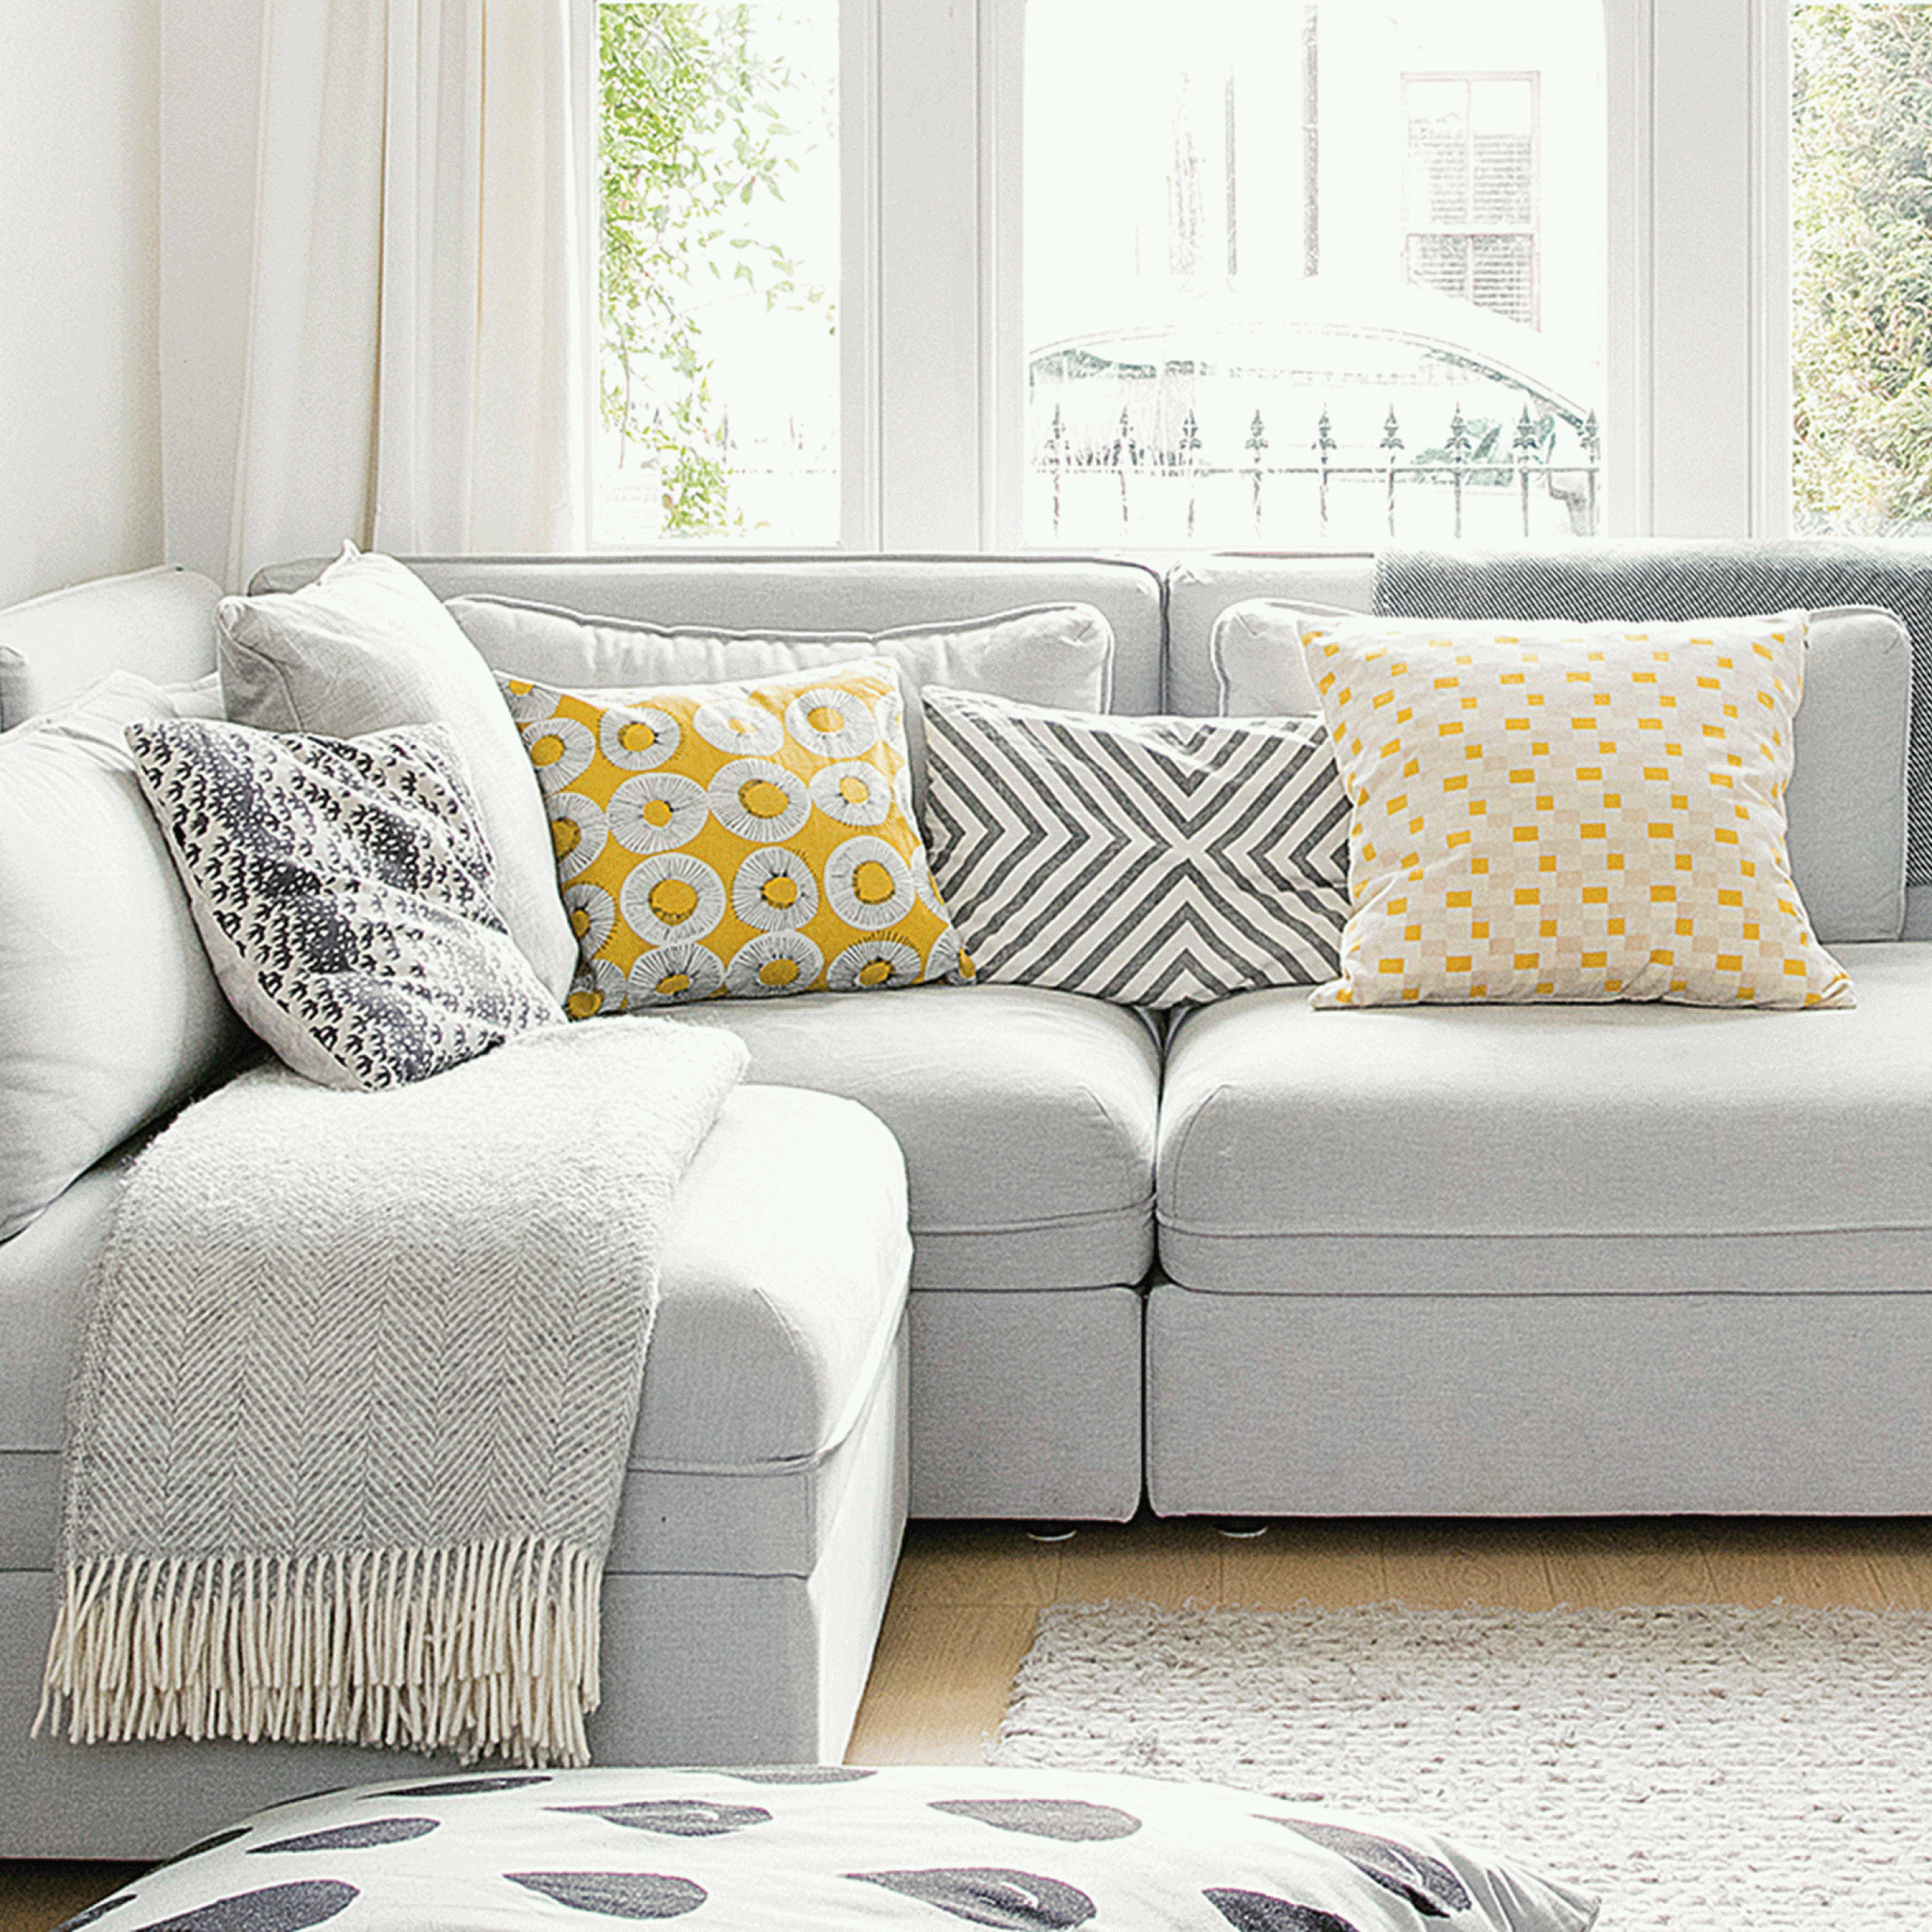 16 Sofa Ideas For Small Living Rooms: Looks, Styles And Tips | Ideal Home Regarding Sofas For Living Rooms (View 6 of 15)